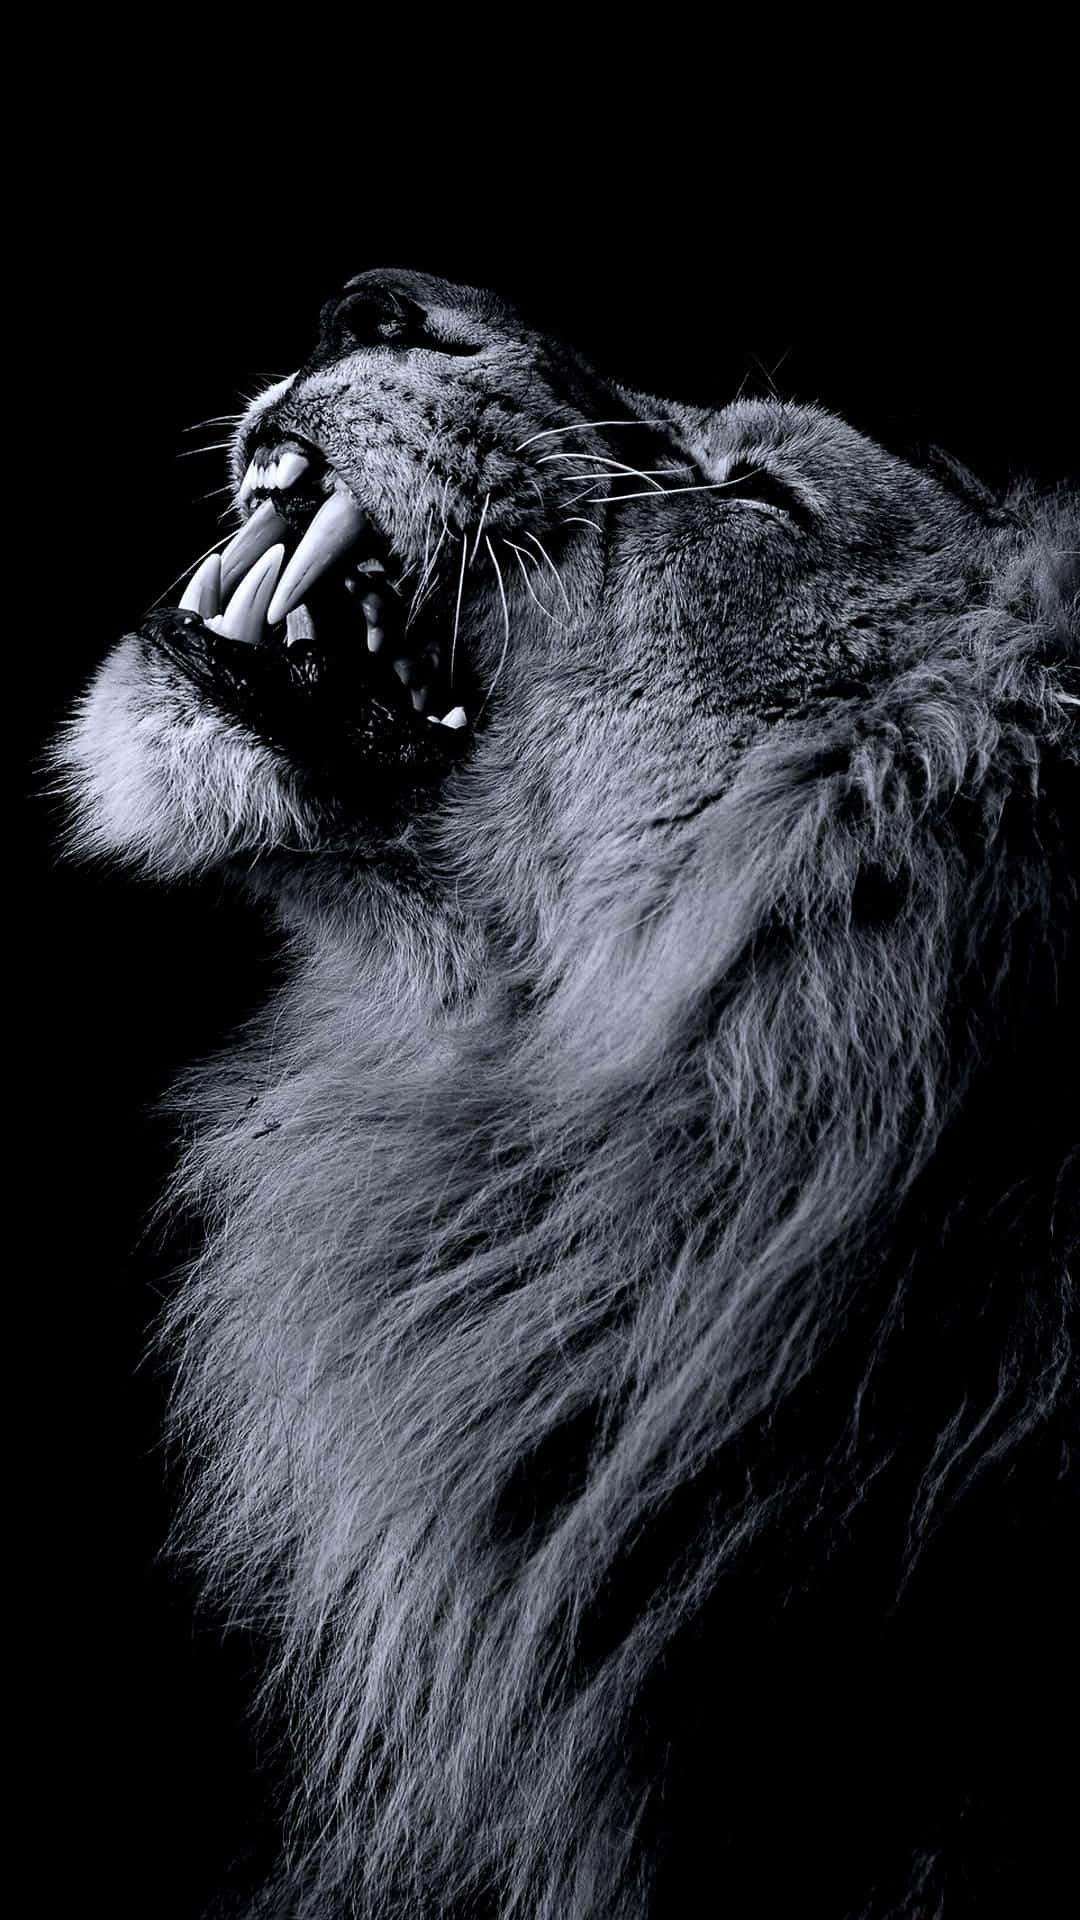 A Proud Lion Roaring Out As A Symbol Of Strength